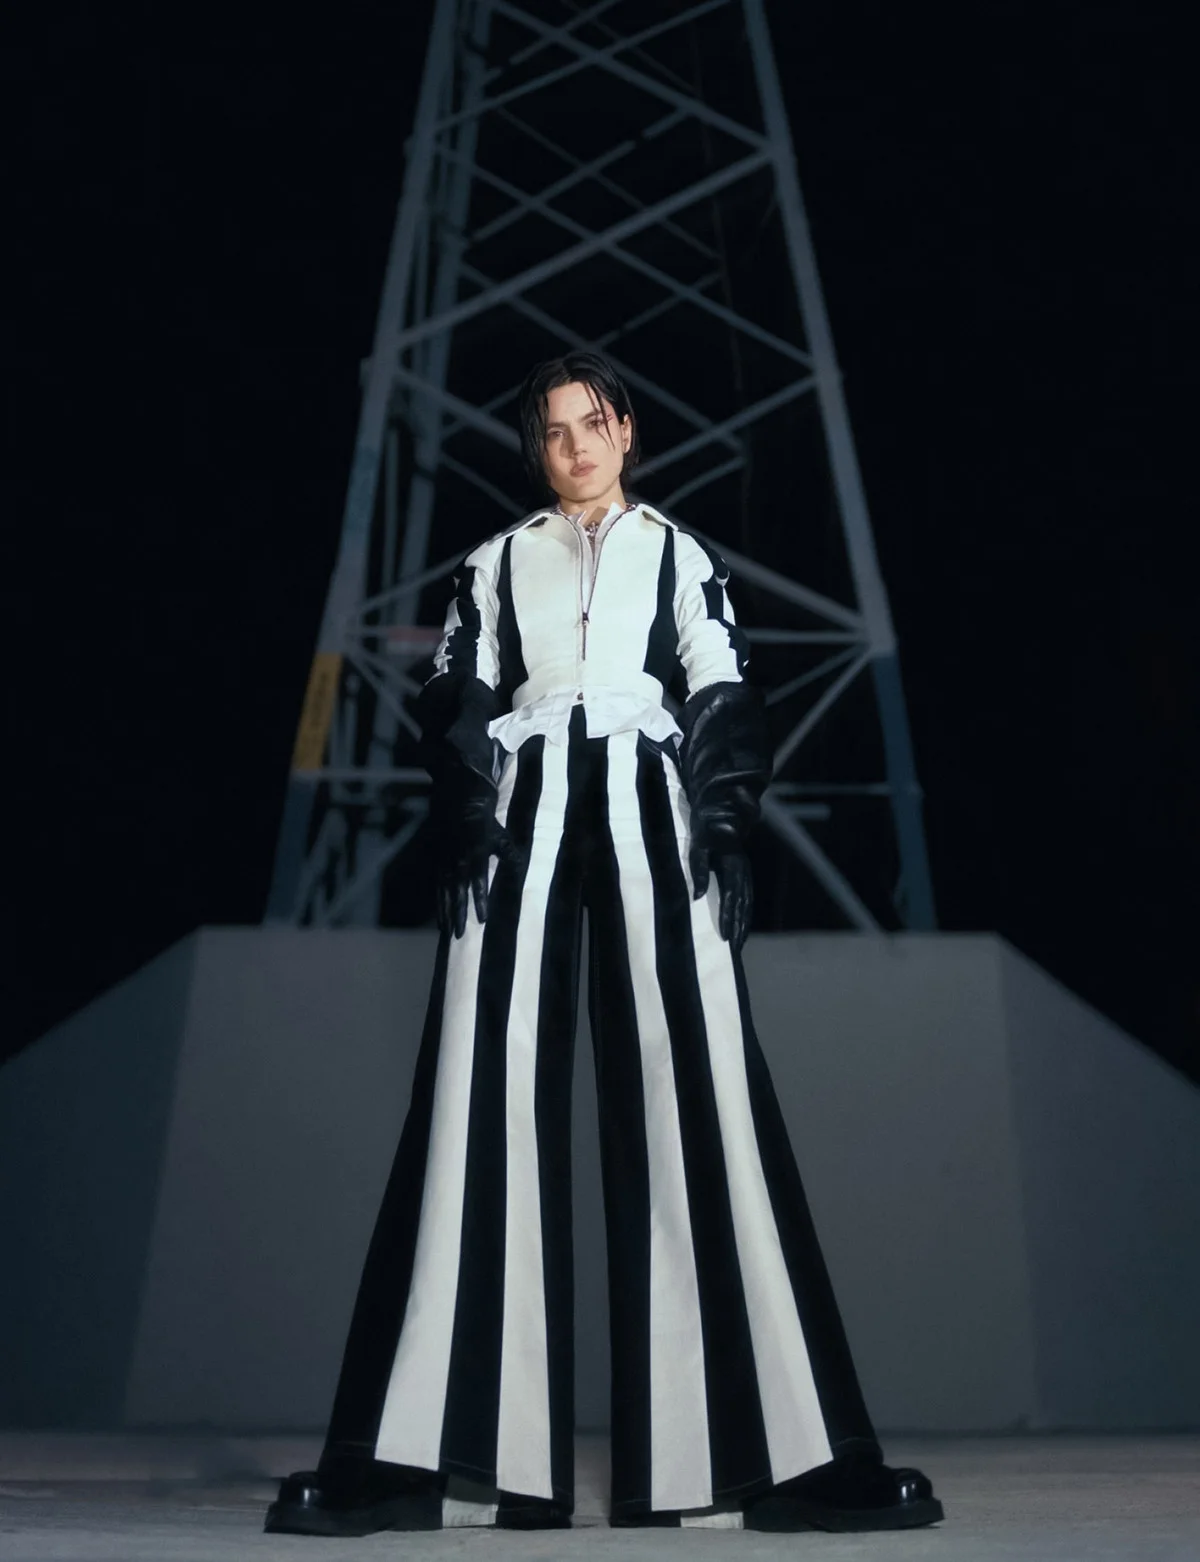 Soko by Colin Solal Cardo for Numéro March 2022